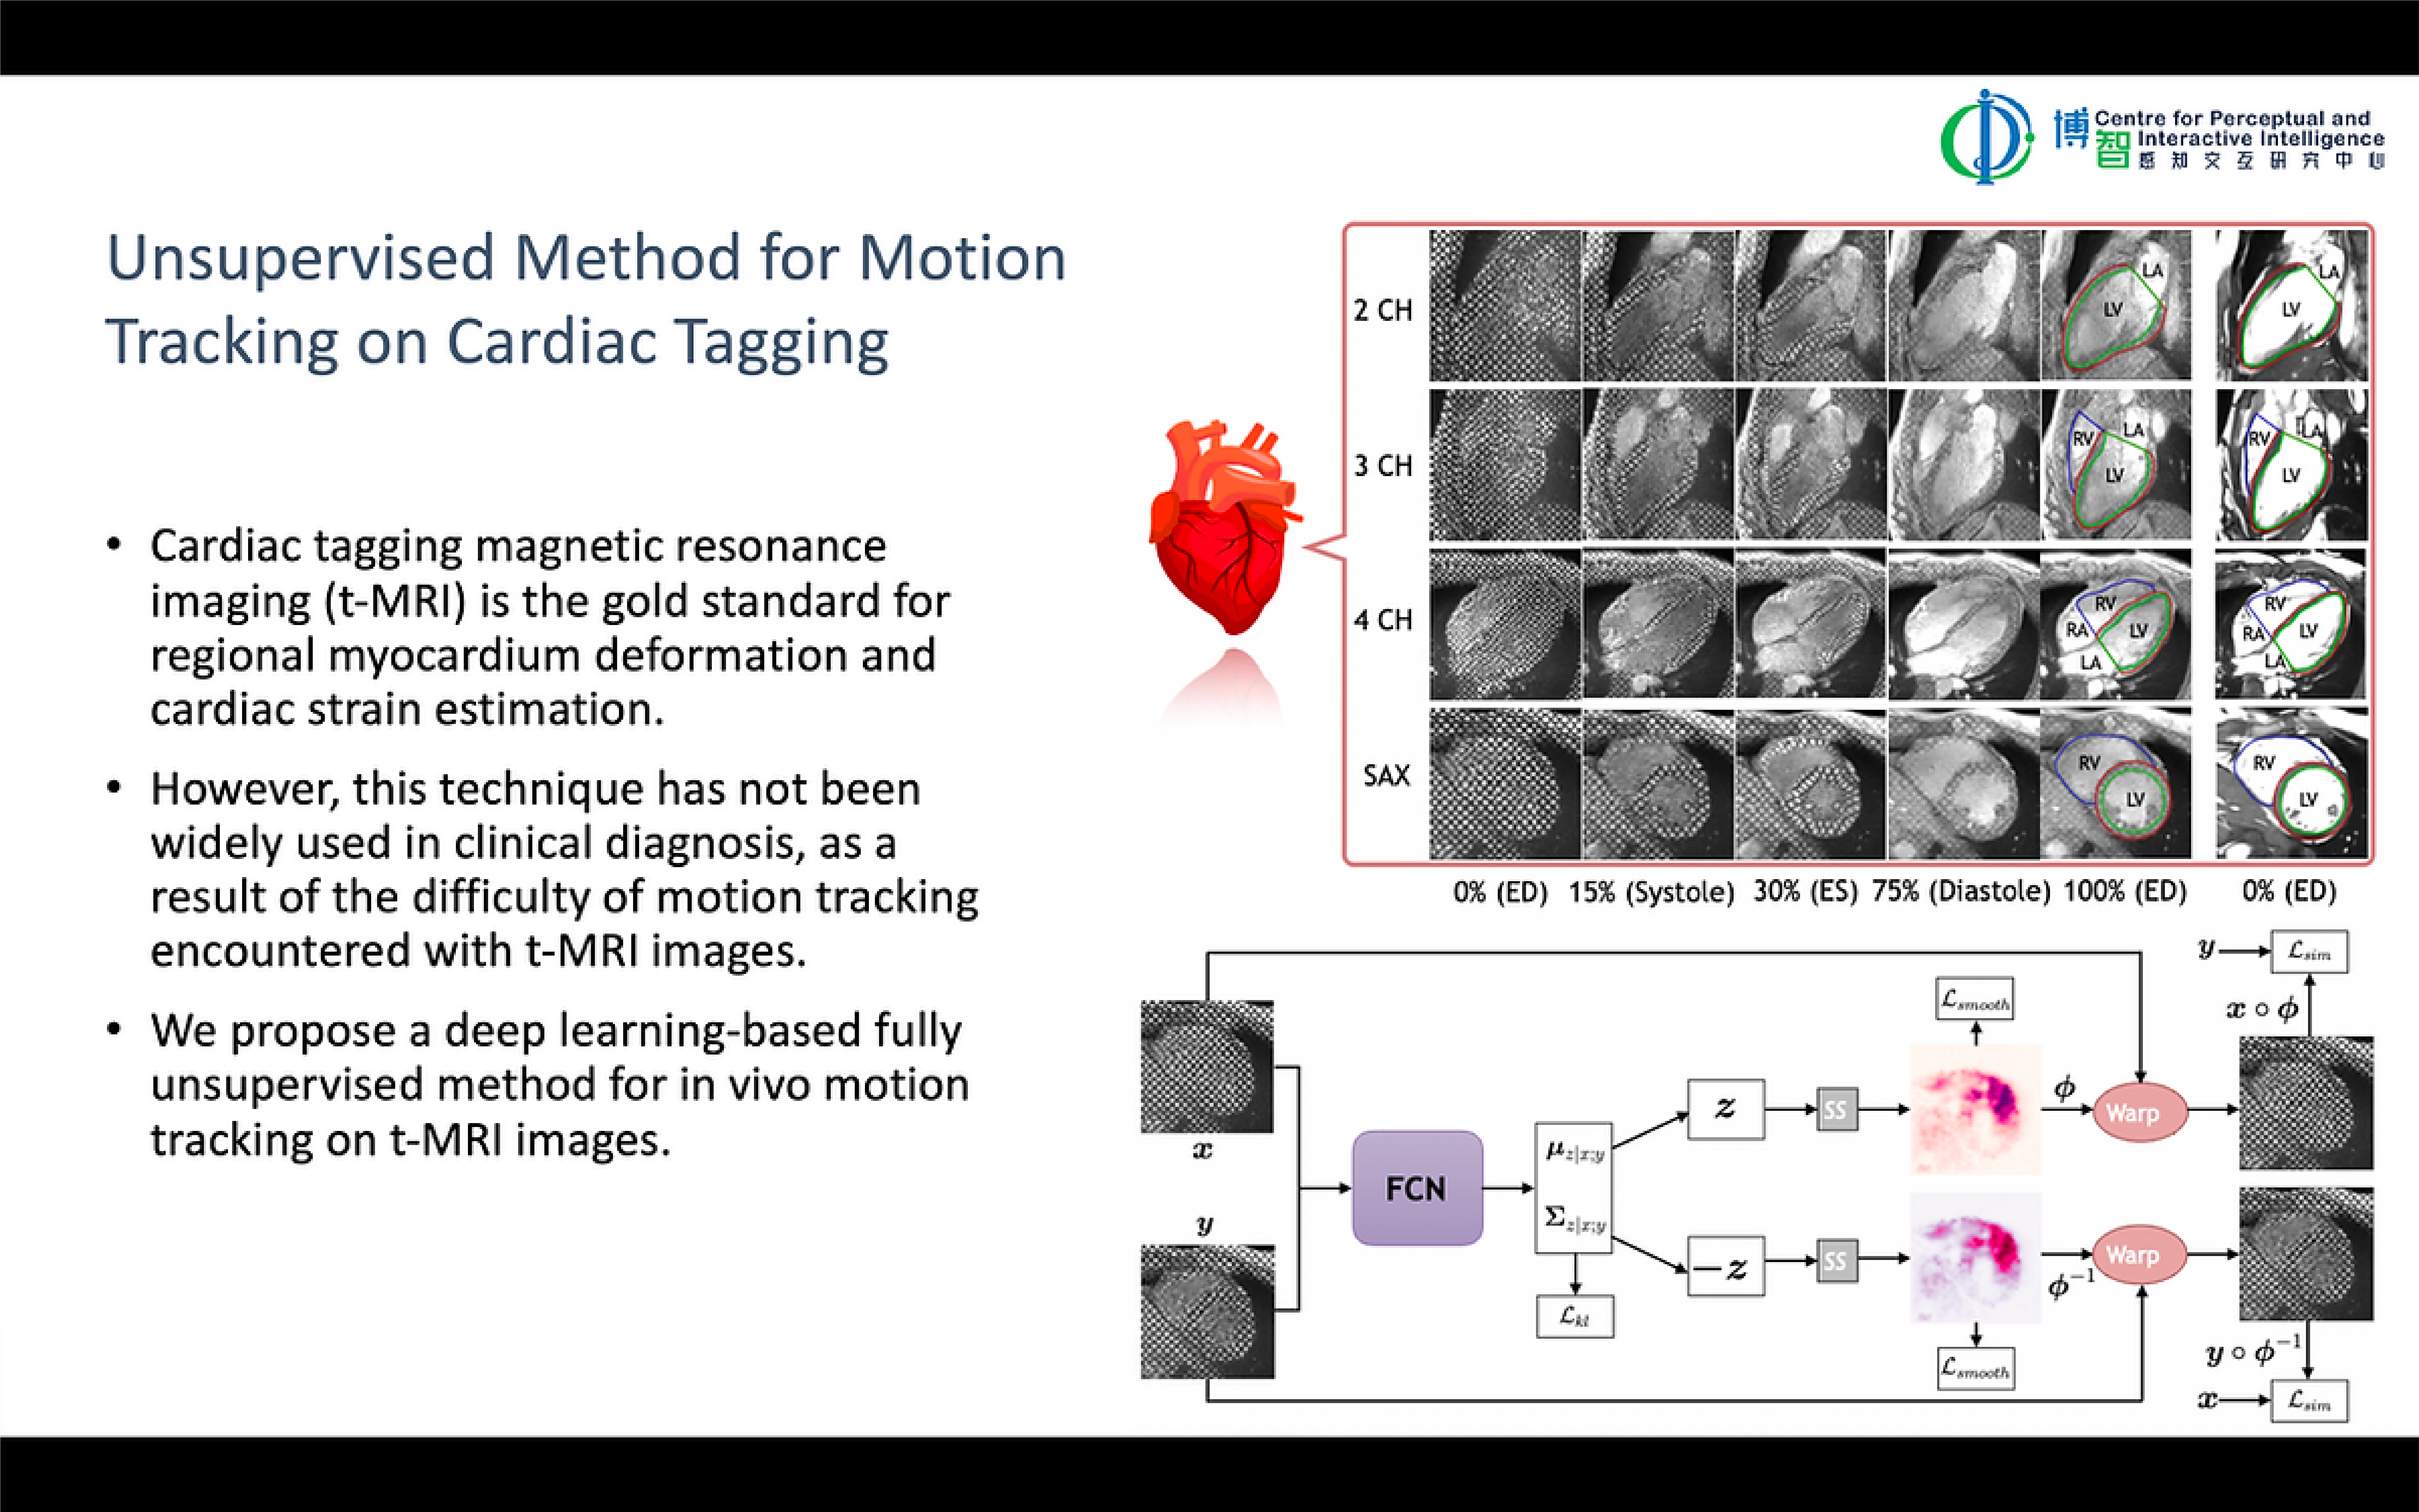 Unsupervised Method for Motion Tracking on Cardiac Tagging